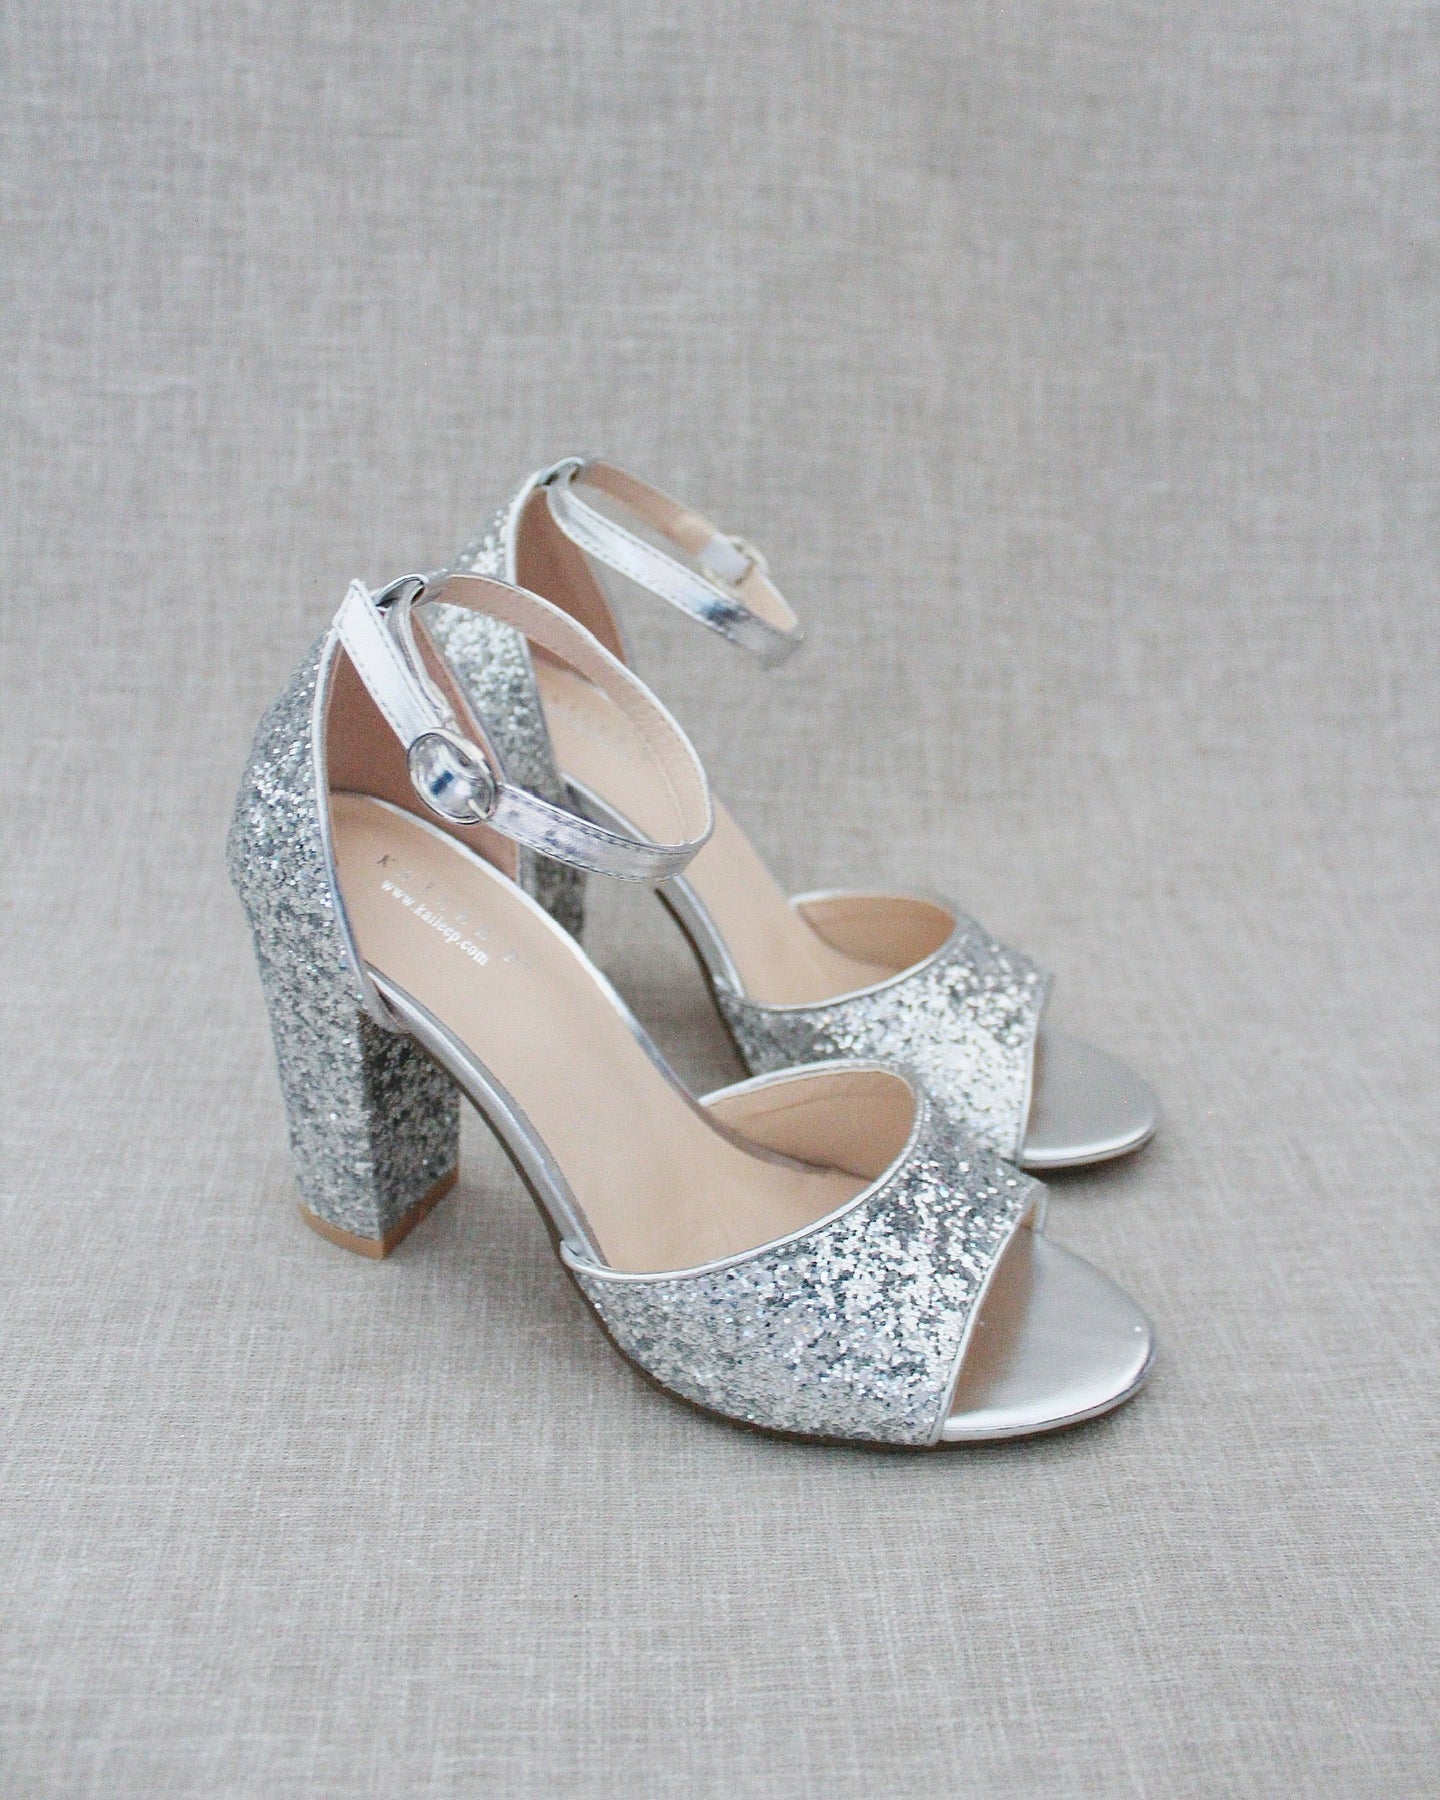 Womens Silver Platform Chunky Heel Ankle Strap Glitter Pumps Wedding Shoes  For Bridesmaid Party Prom Wear, Size 34 42 From Tradingbear, $39.32 |  DHgate.Com